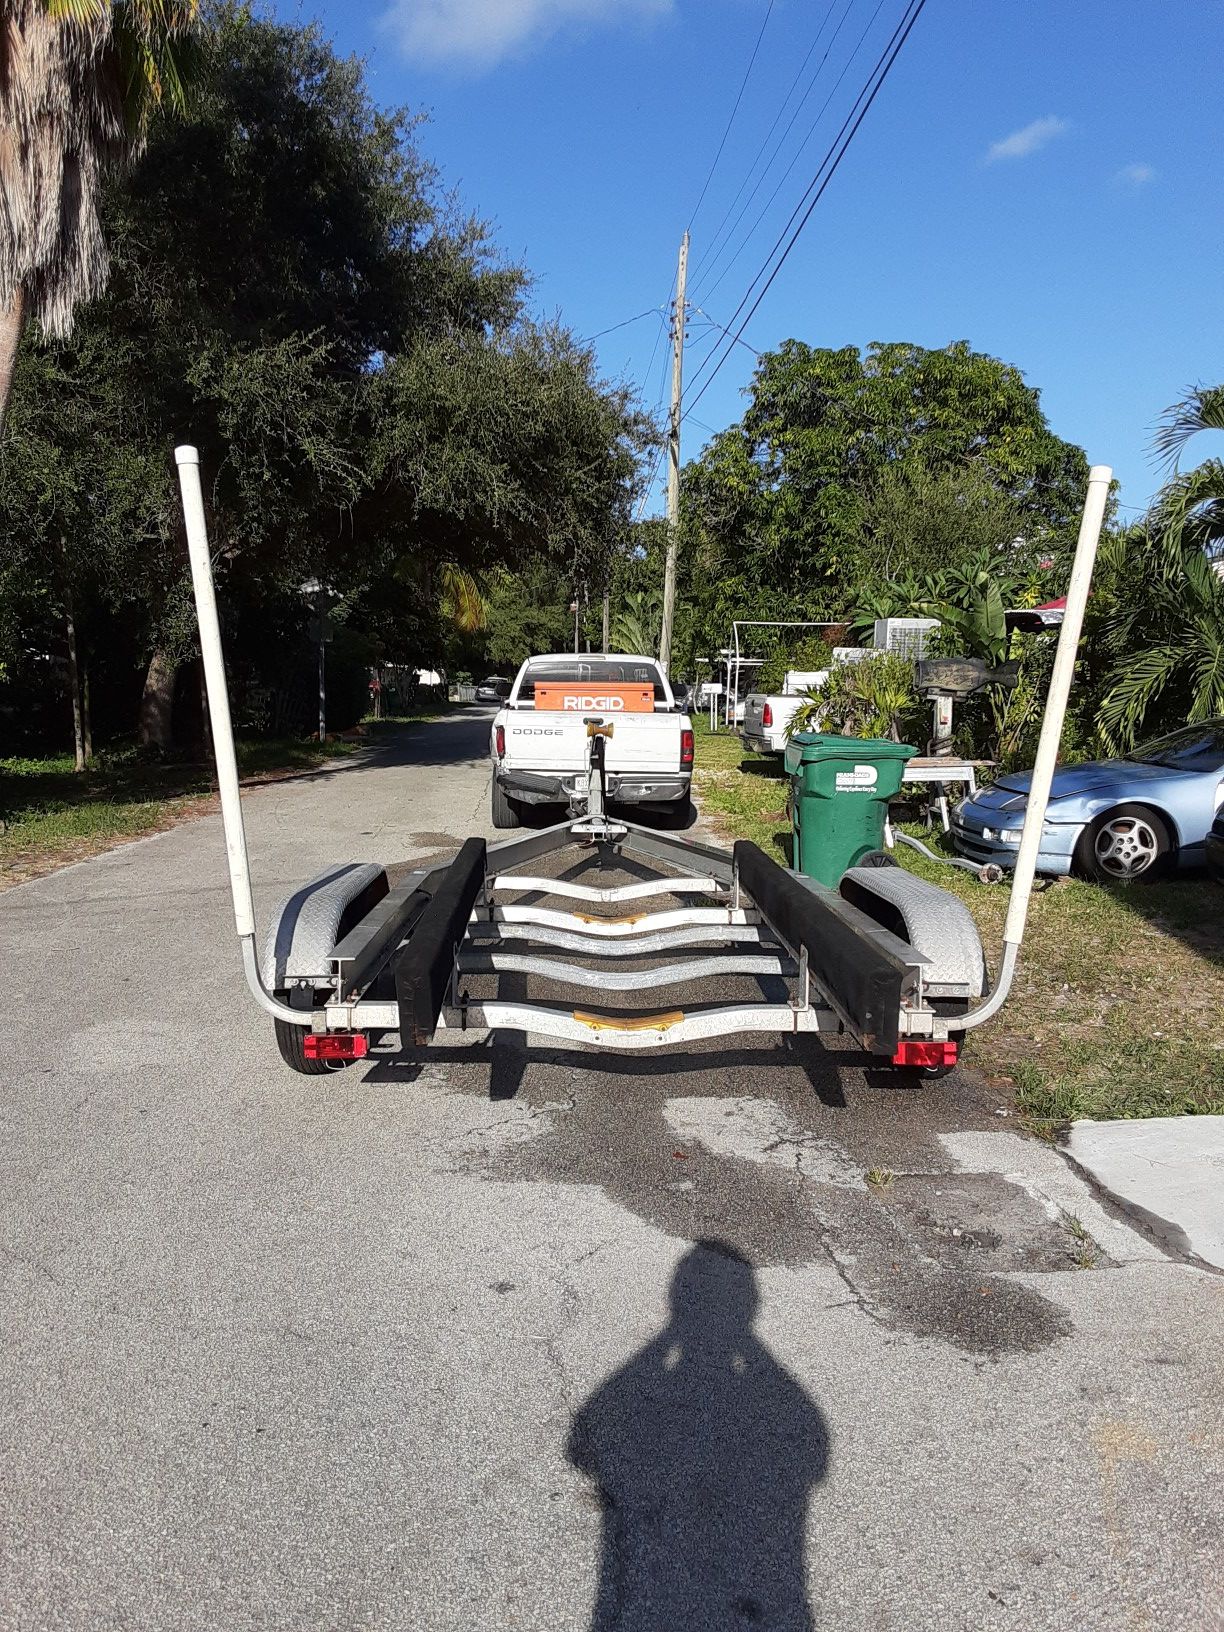 Continental trailer for 23ft or 24ft boat